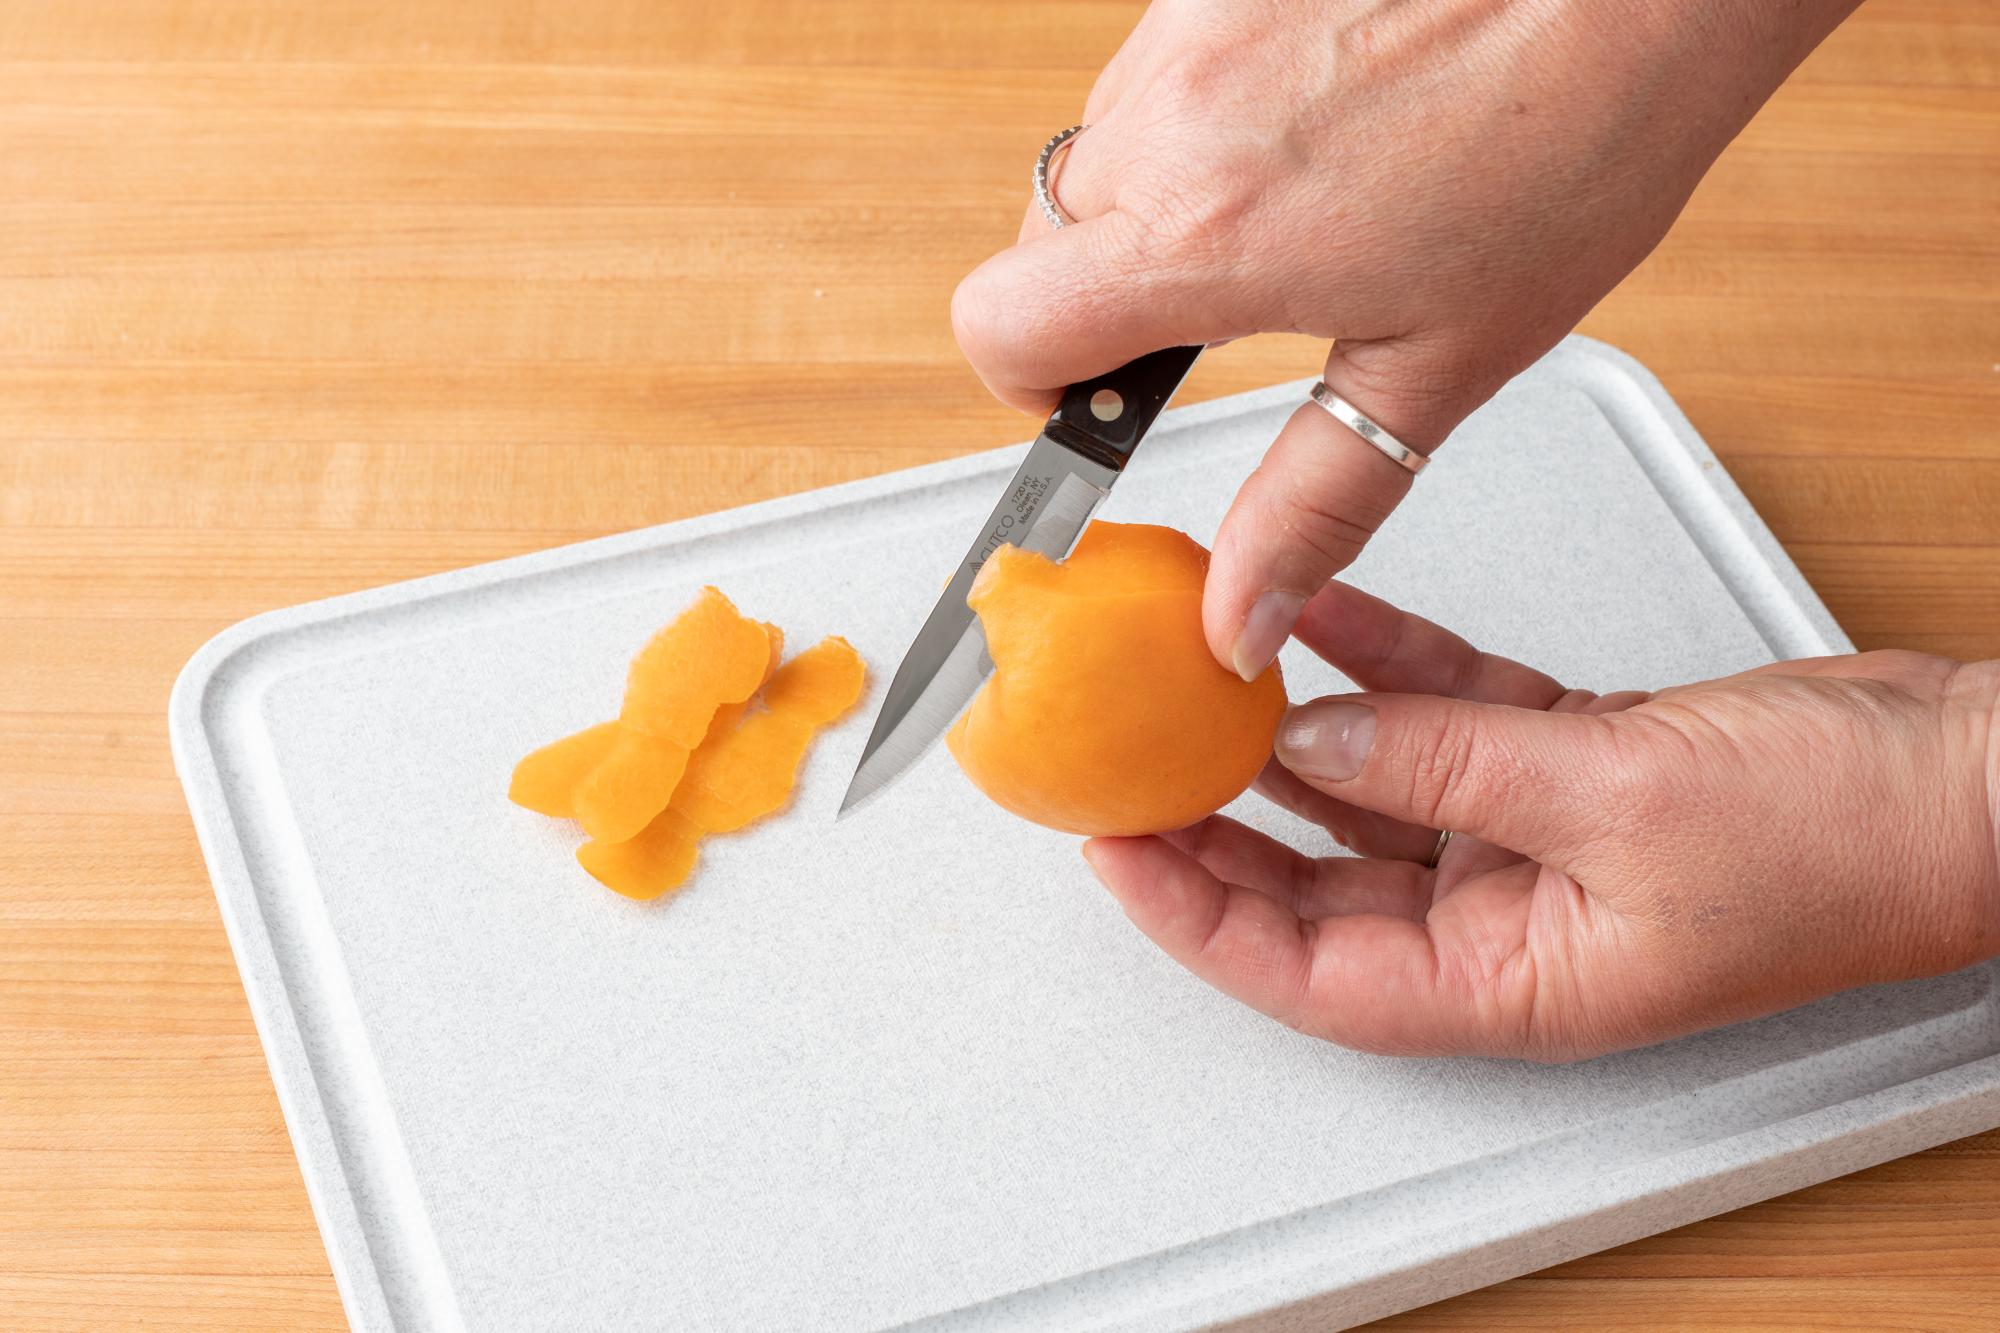 The smaller paring knife is perfect for peeling the apricot.